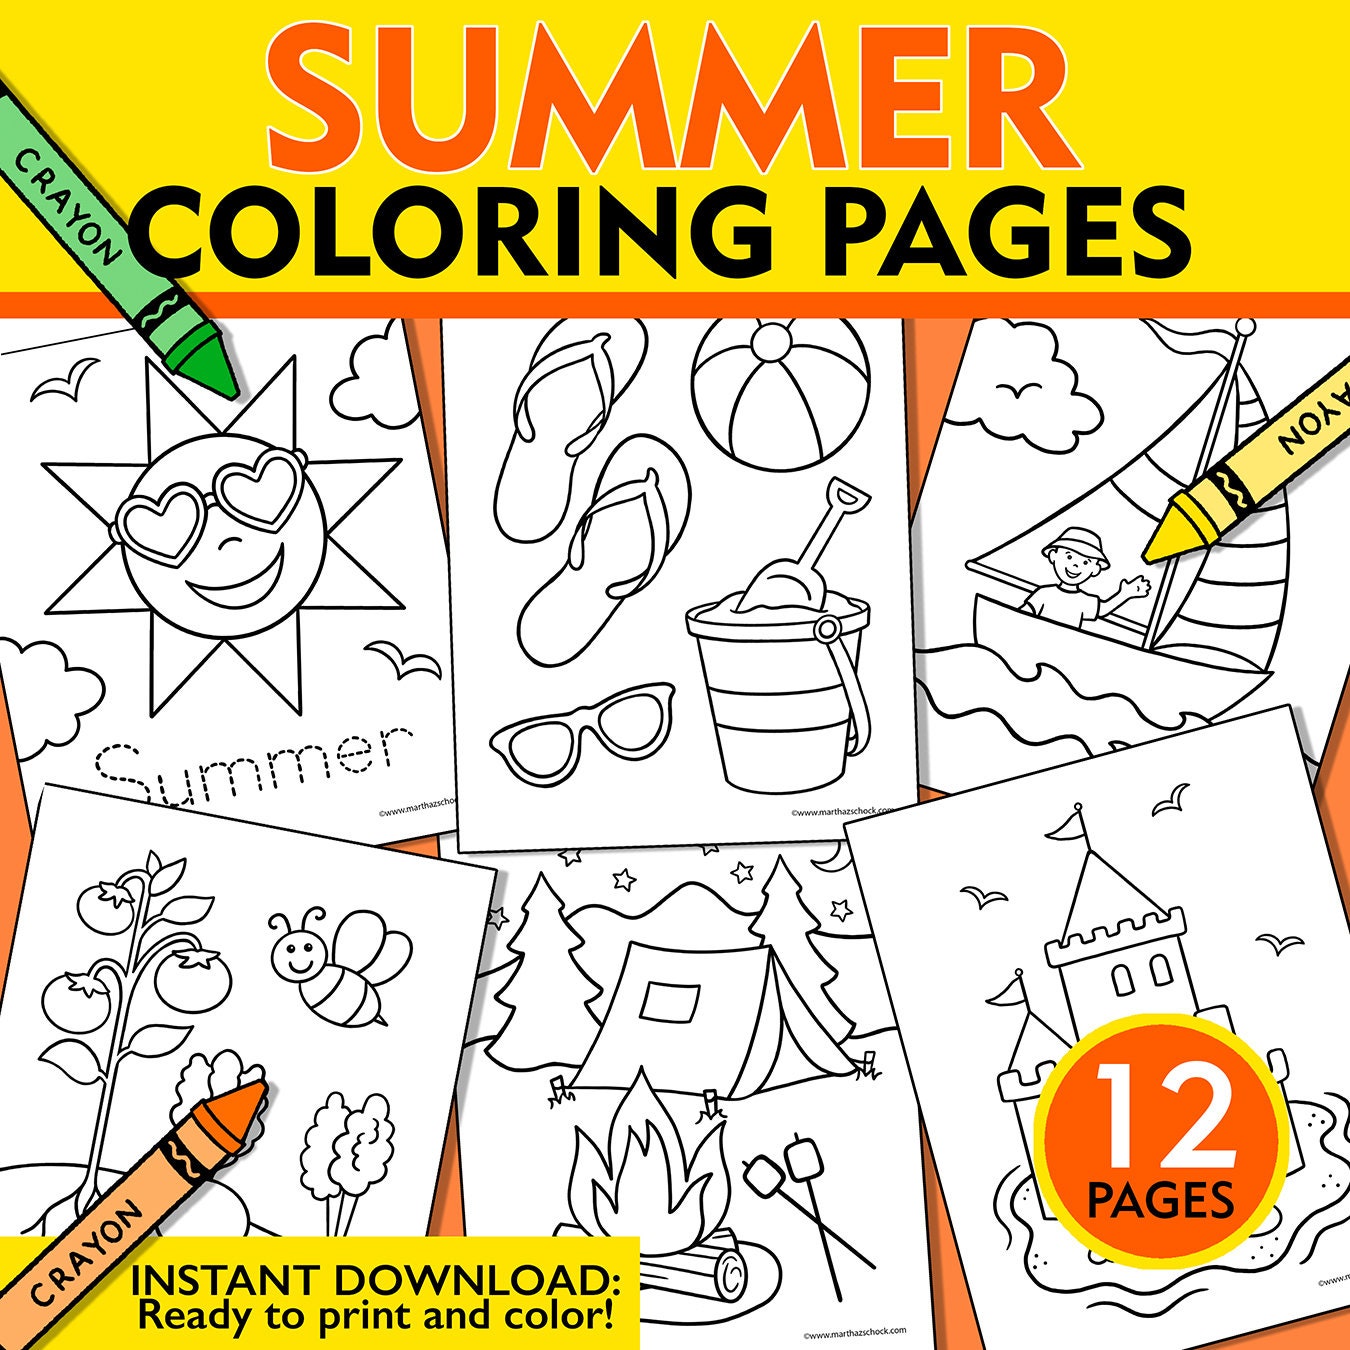 Coloring Poster, Giant Coloring Poster, Doodle, Doodle Coloring, Coloring  for Kids, Fun Kids Activities, Color, Summer Activities 